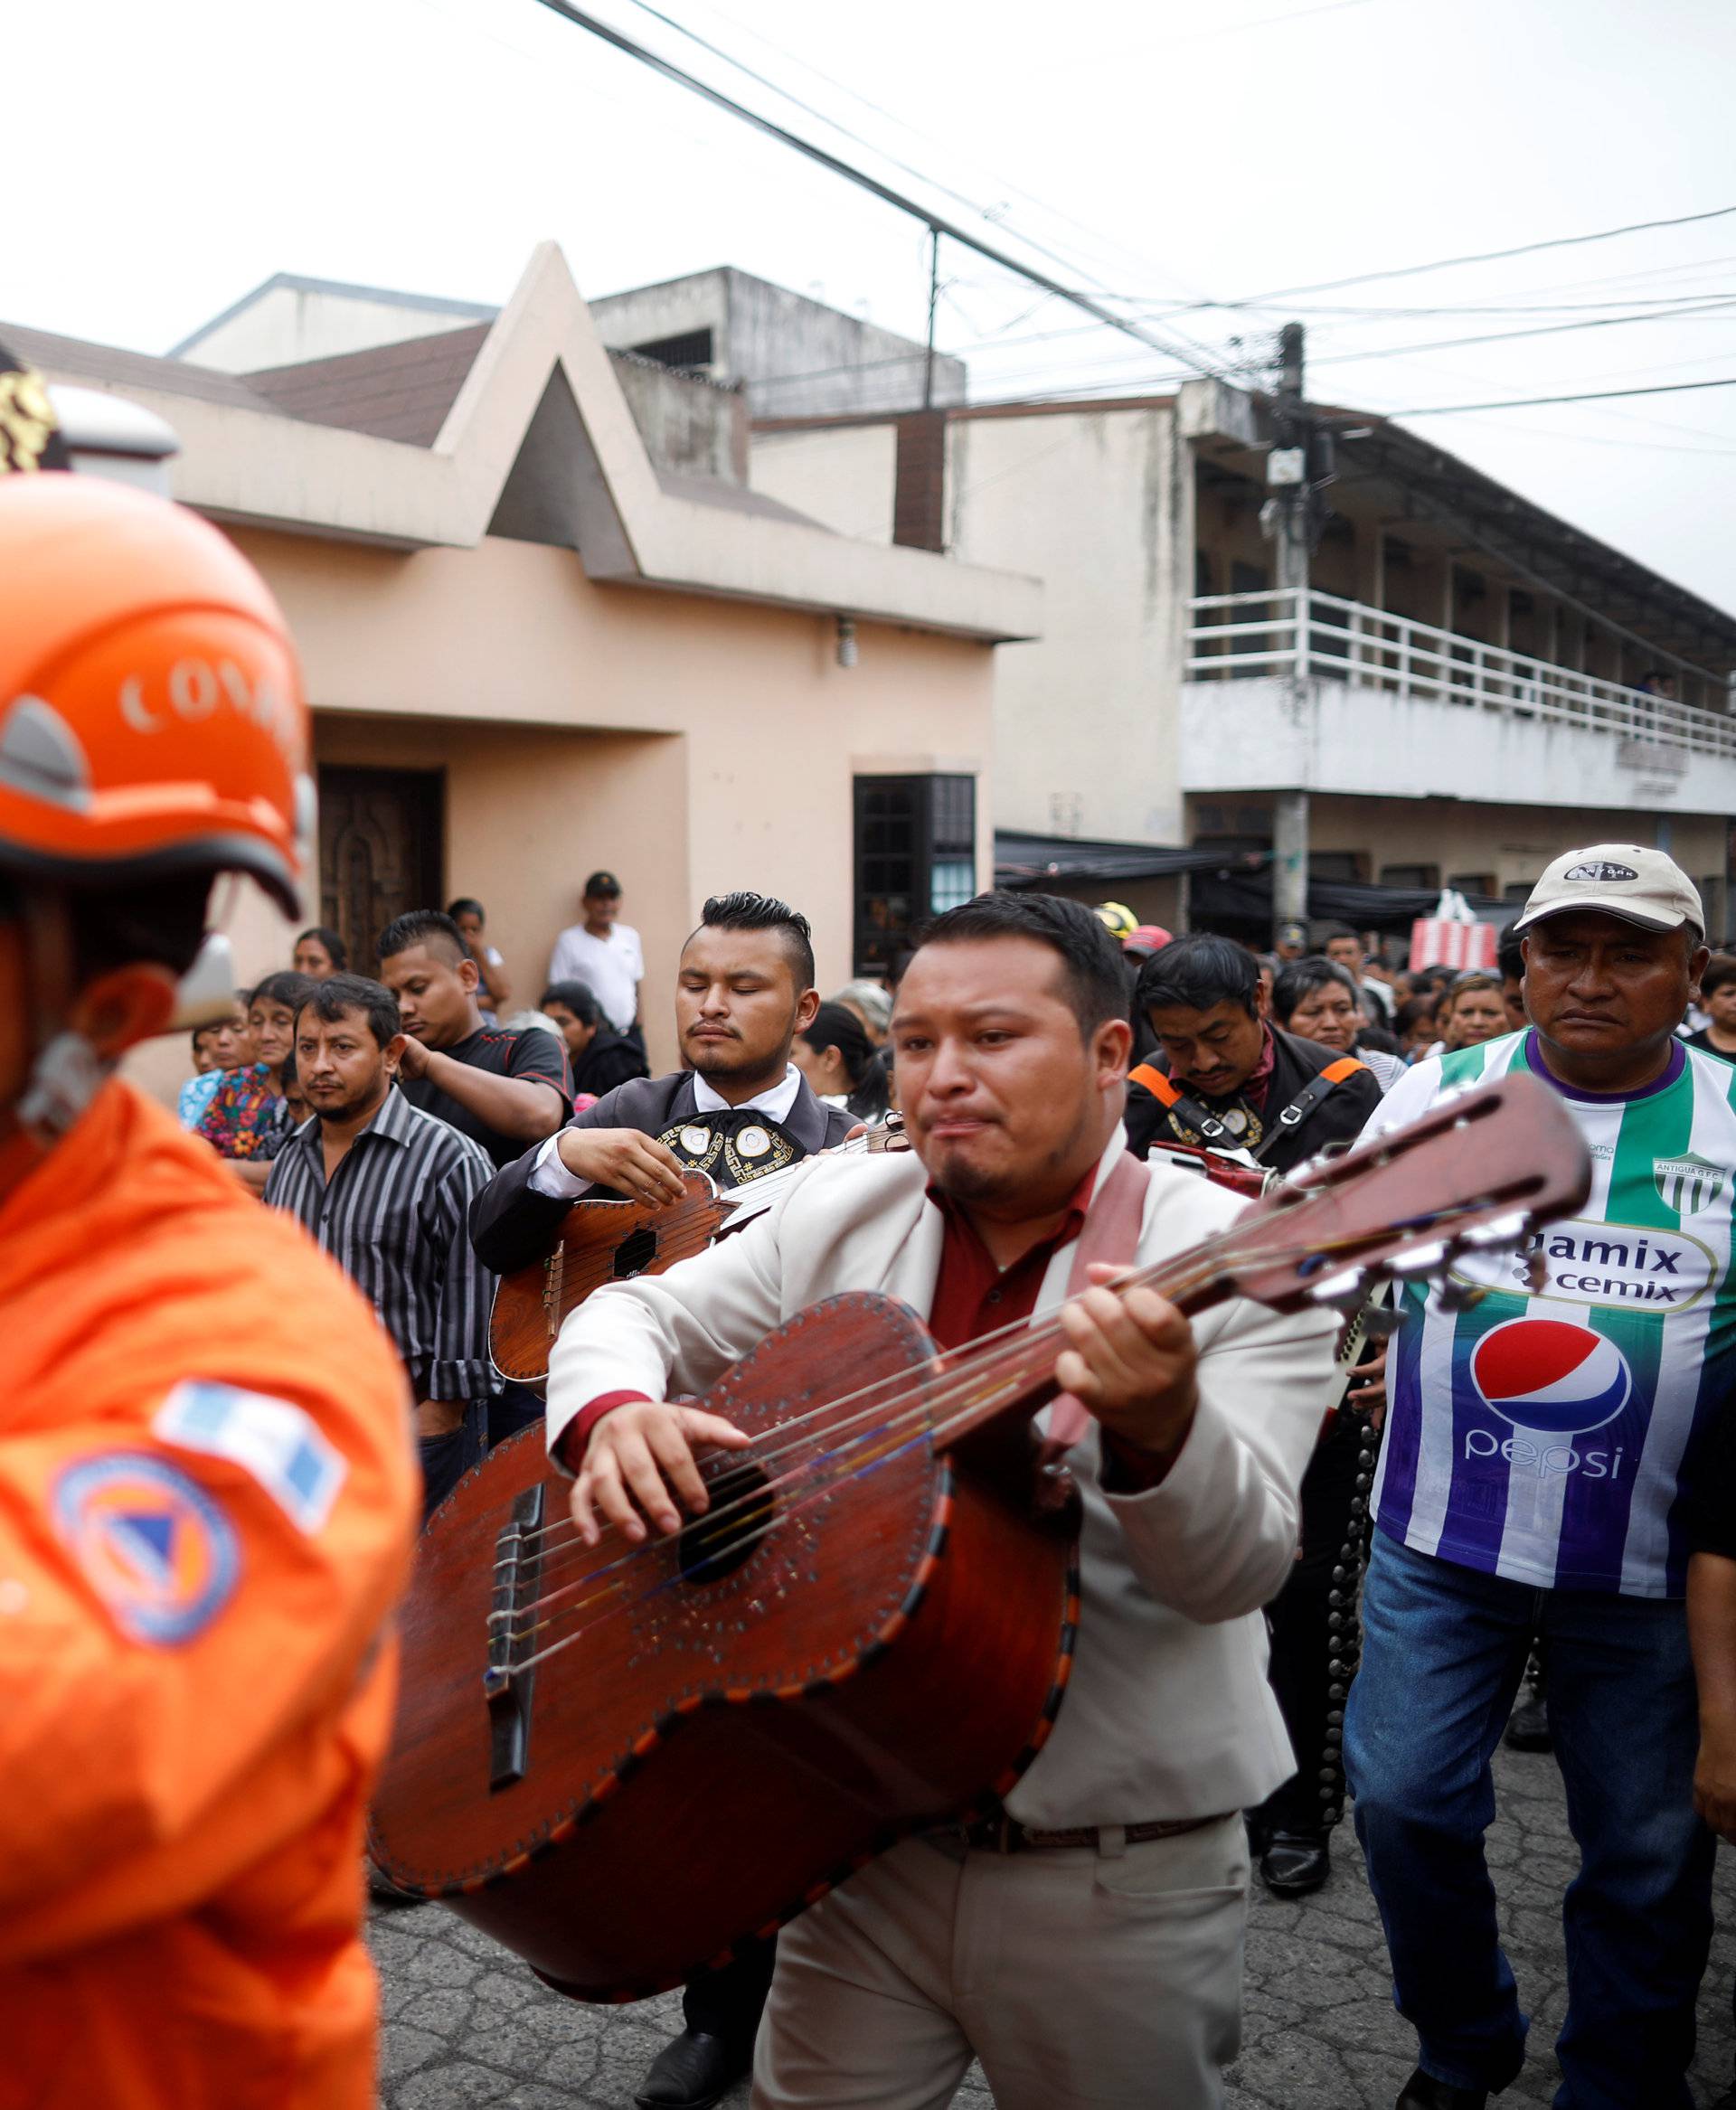 Musicians perform during the funeral of Juan Fernando Galindo, member of the National Coordinator for Disasters Reduction (CONRED), in Alotenango